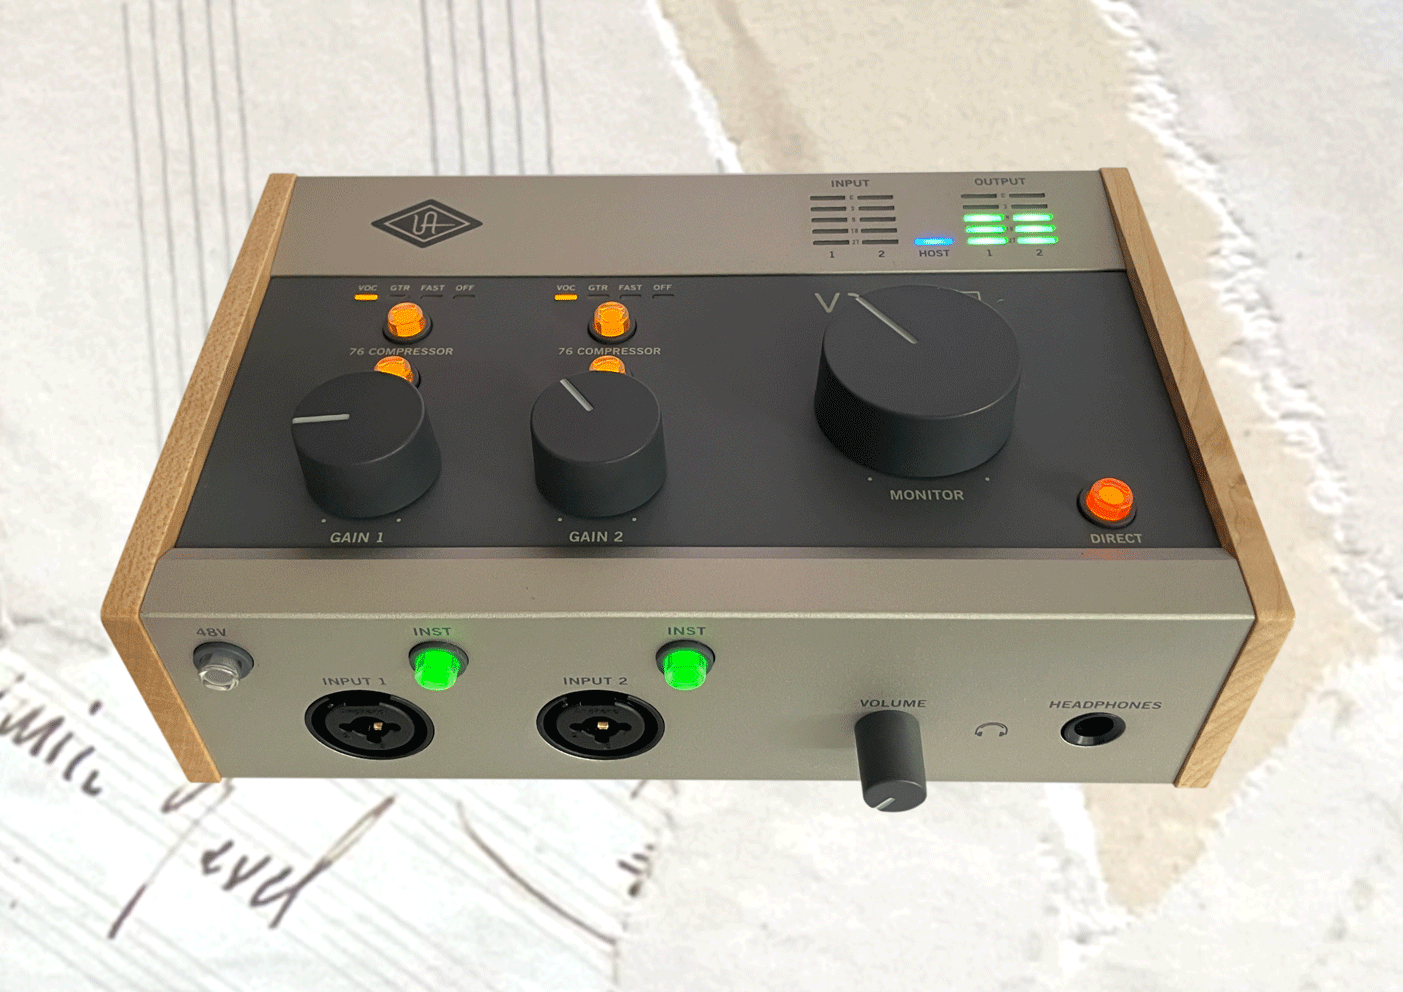 The Volt 276 - probably  one of the the nicest looking audio interfaces I've tested